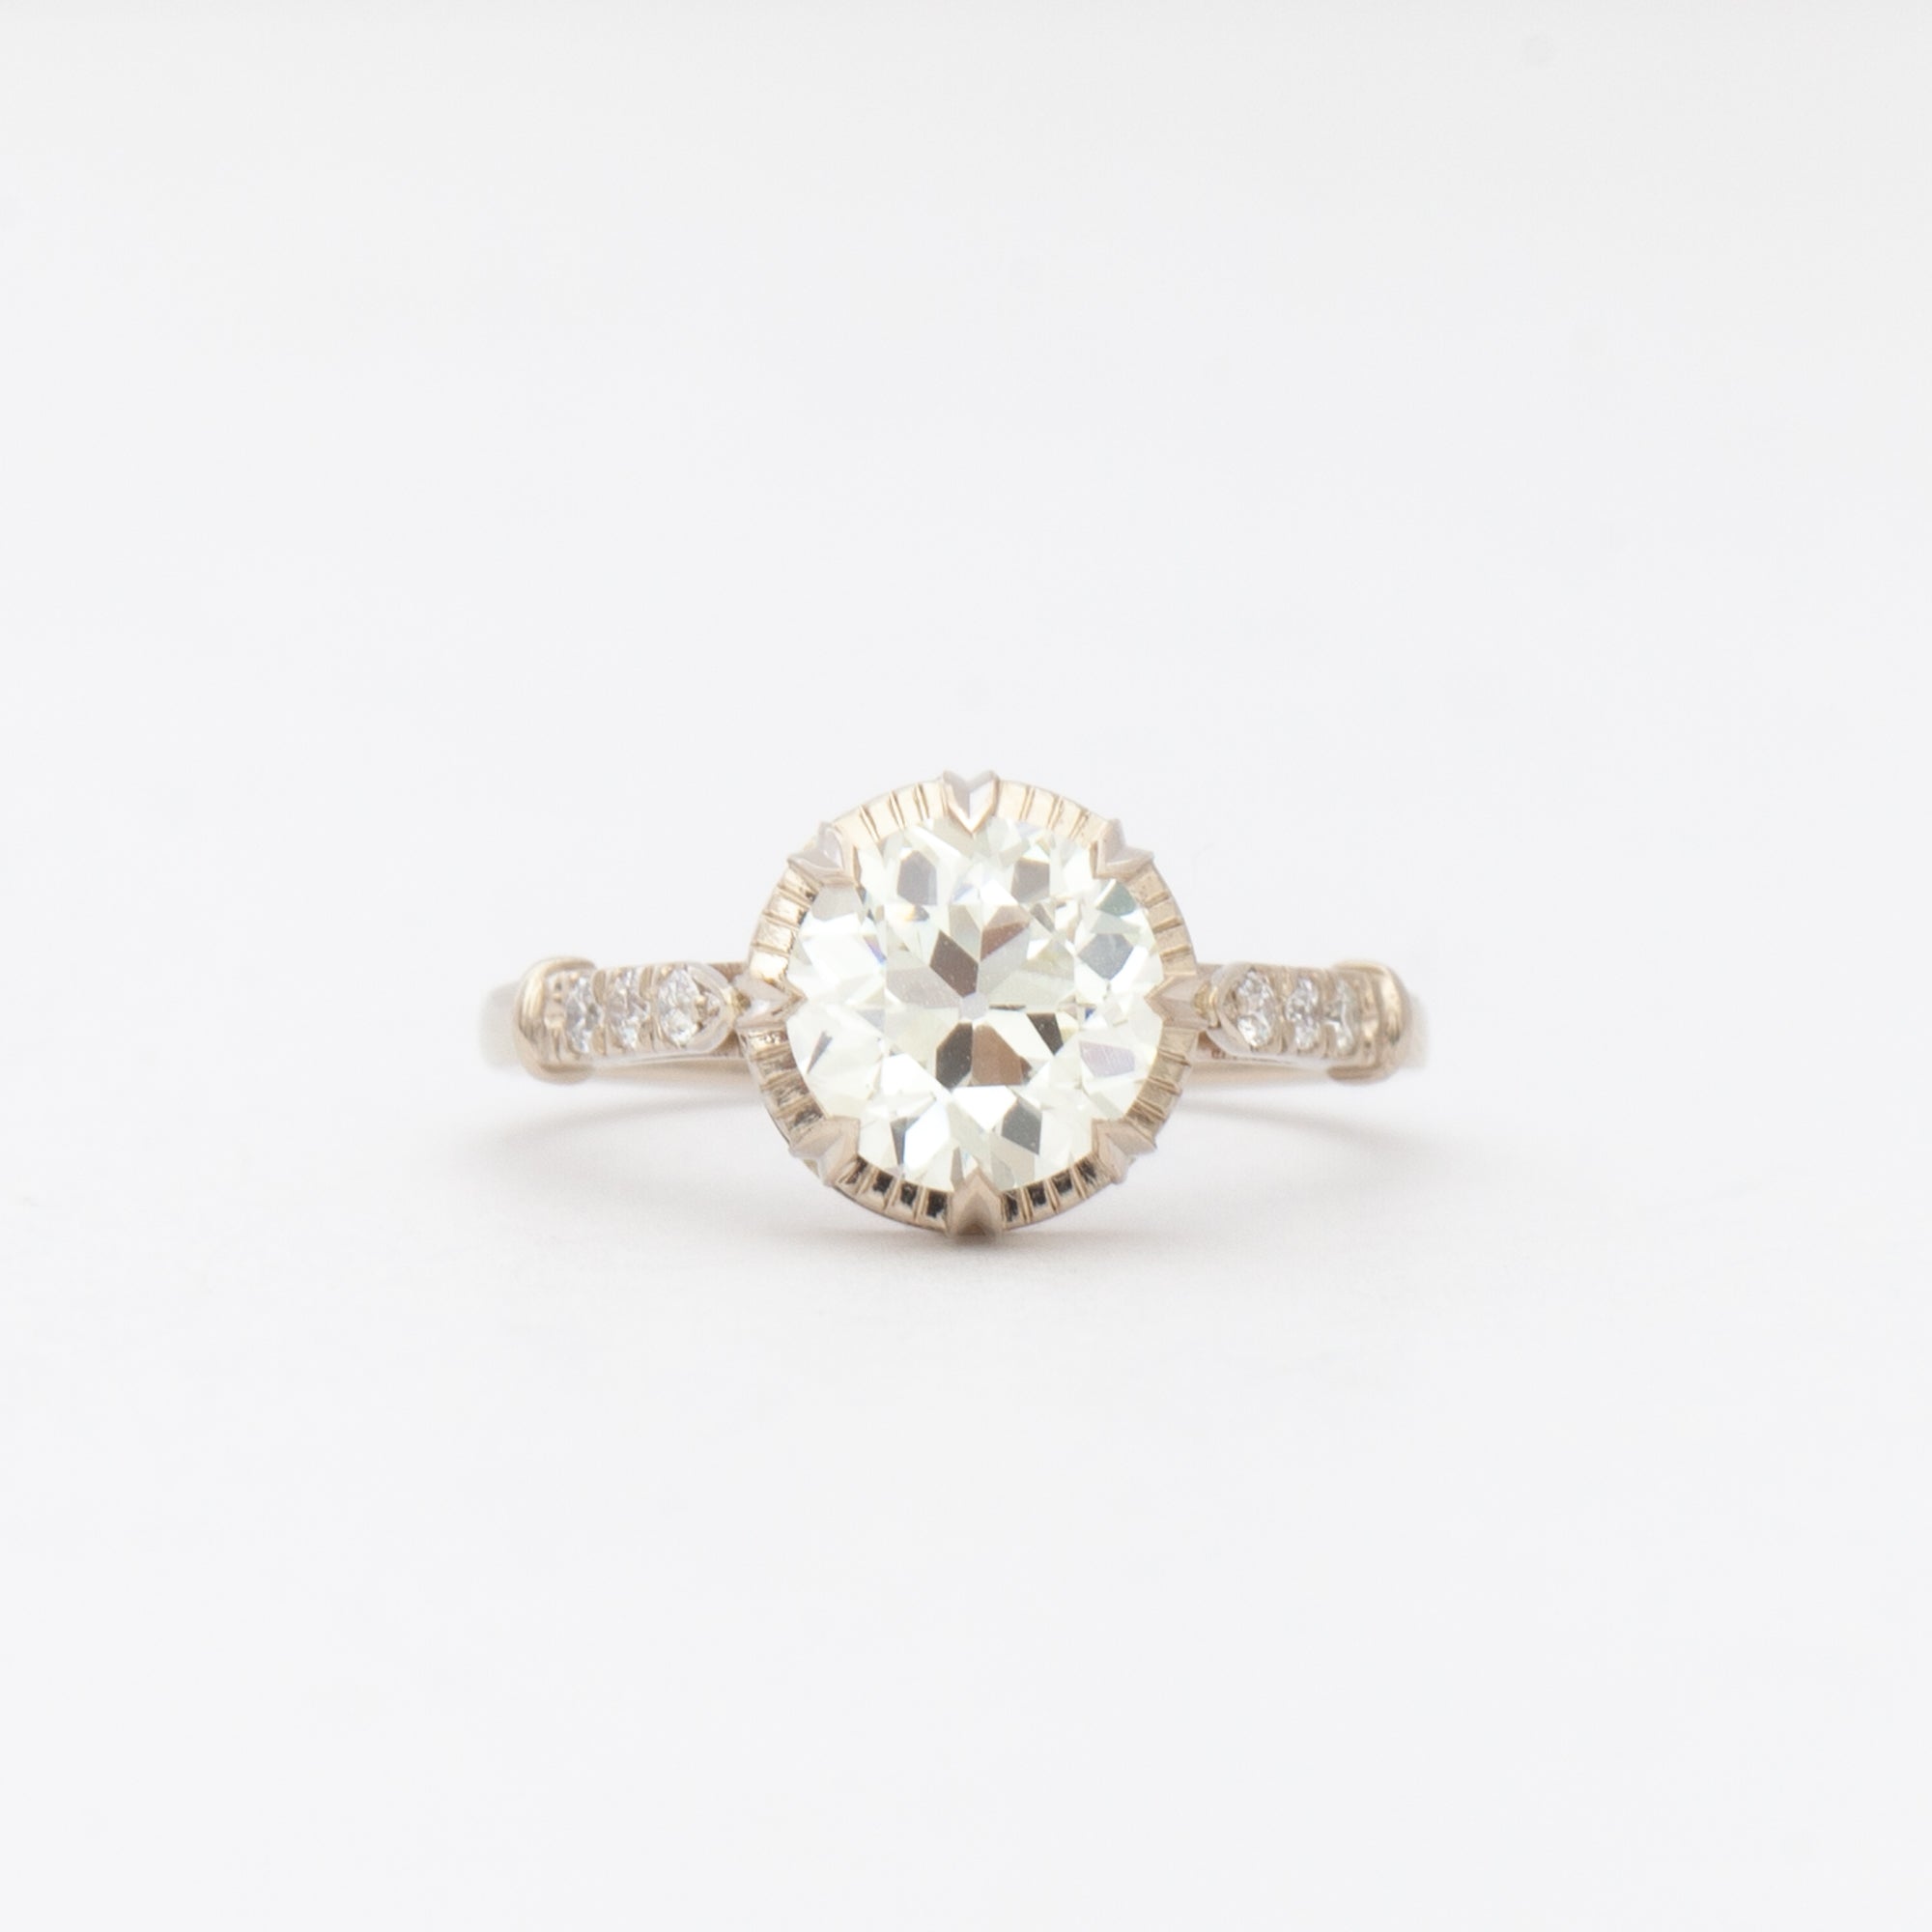 Arielle Diamond Ring Online Jewellery Shopping India